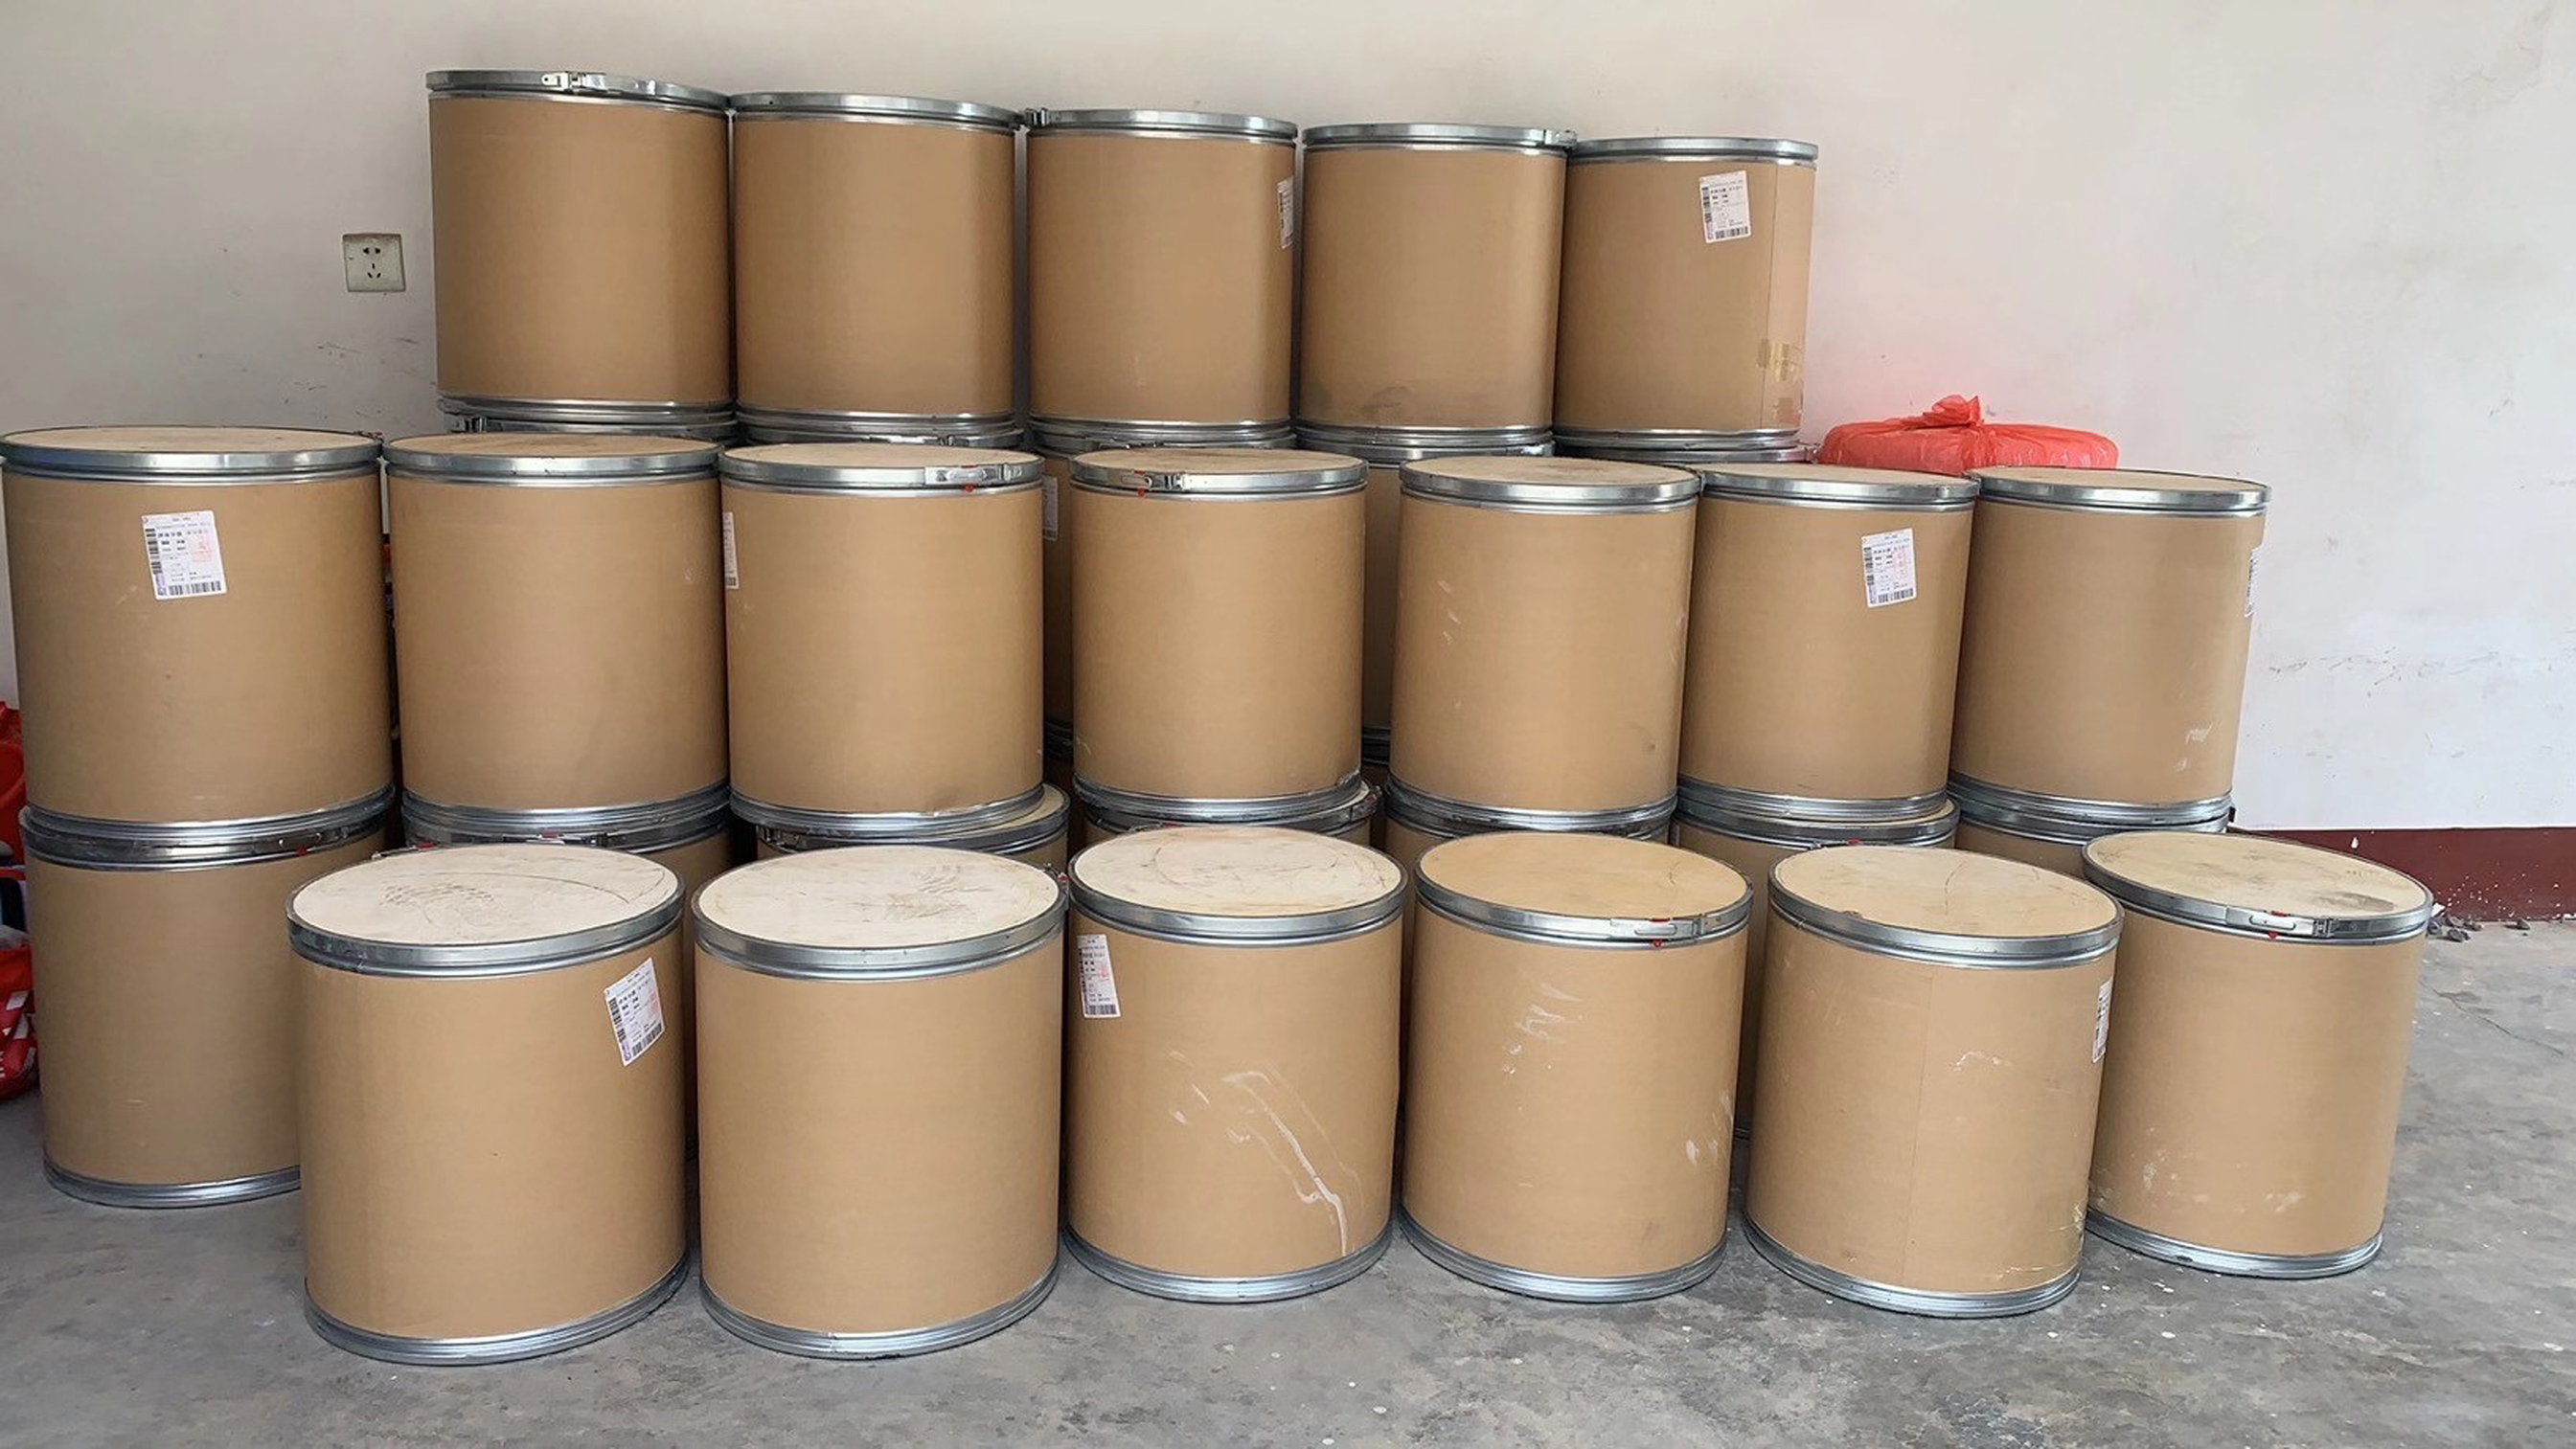 Leather biocides 98% Purity CAS: 6317-18-6 Methylene Bis Thiocyanate biocides MBT